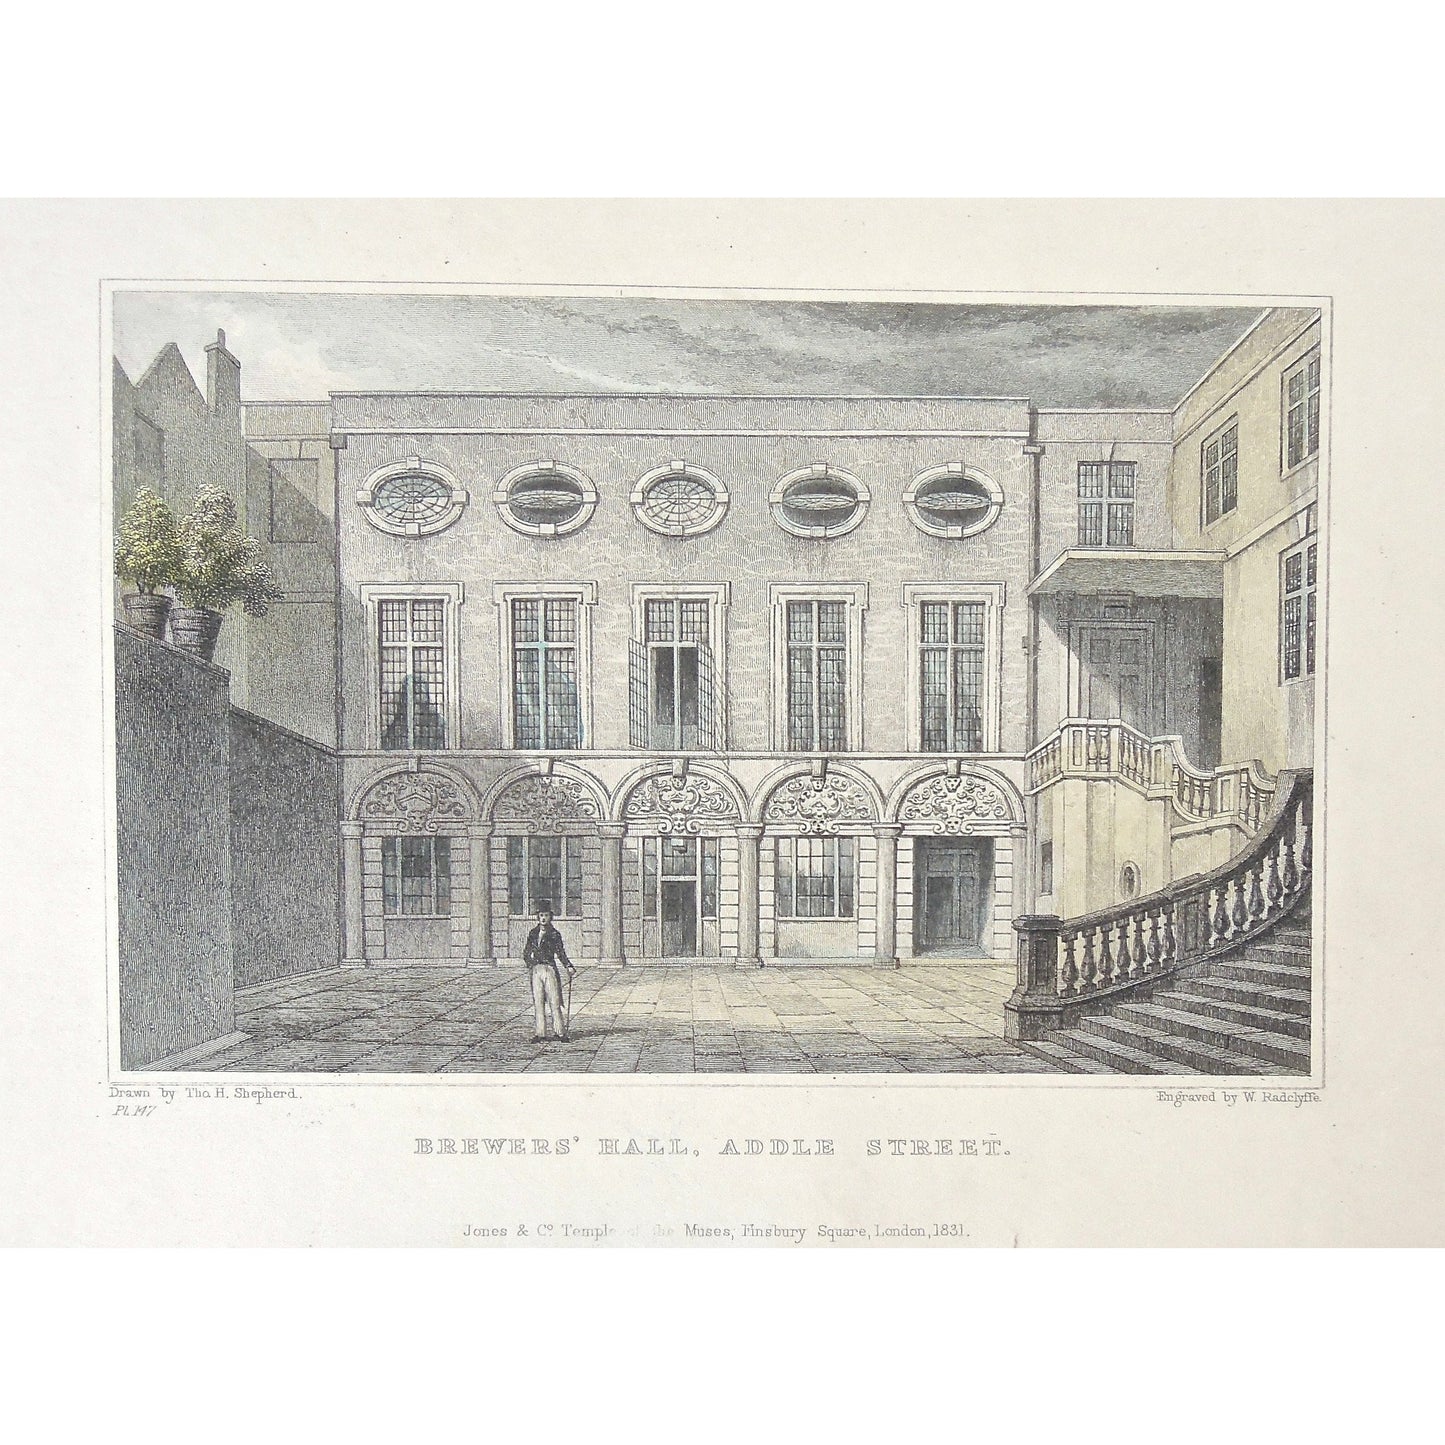 Grocers' Hall, Poultry. / Brewers' Hall, Addle Street.  (S2-50)